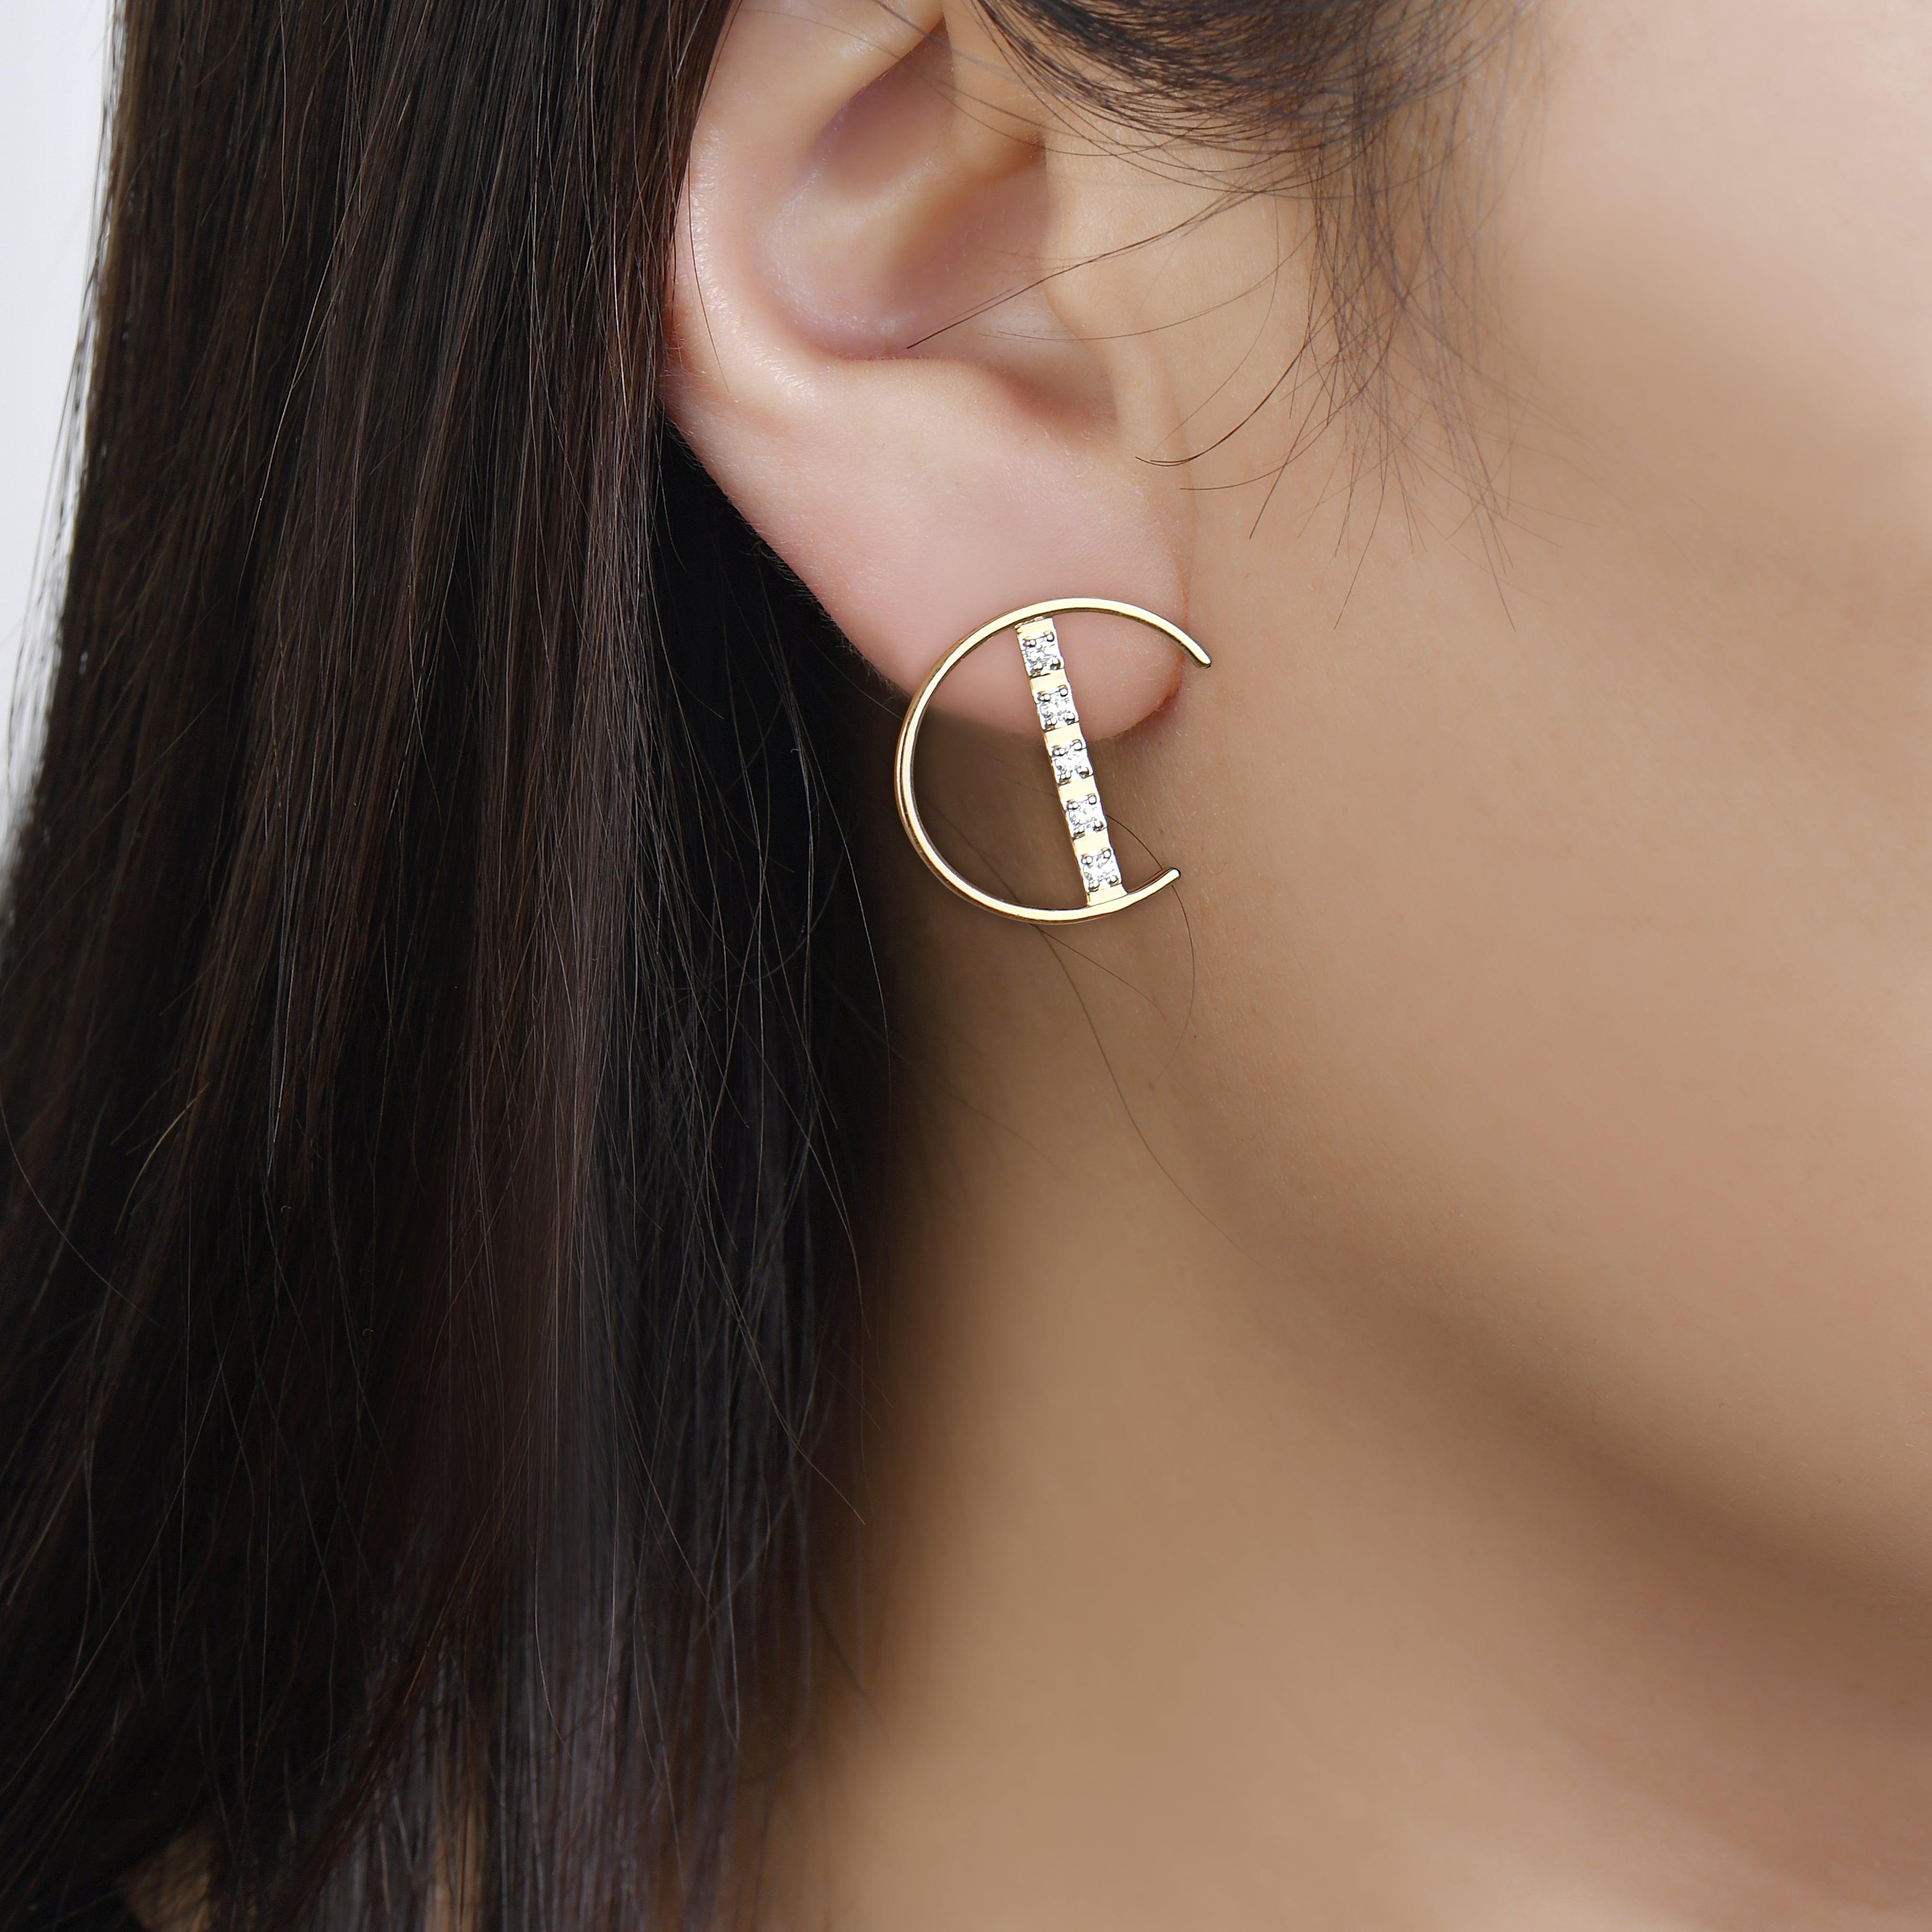 Our Half Circle Diamond Bar Stud Earrings are the definition of a double take. A simple yet stunning design of a unique pair of earrings in 14k yellow gold. Discover the elegance of this unique take on stud earrings in 14k yellow gold. Wear these